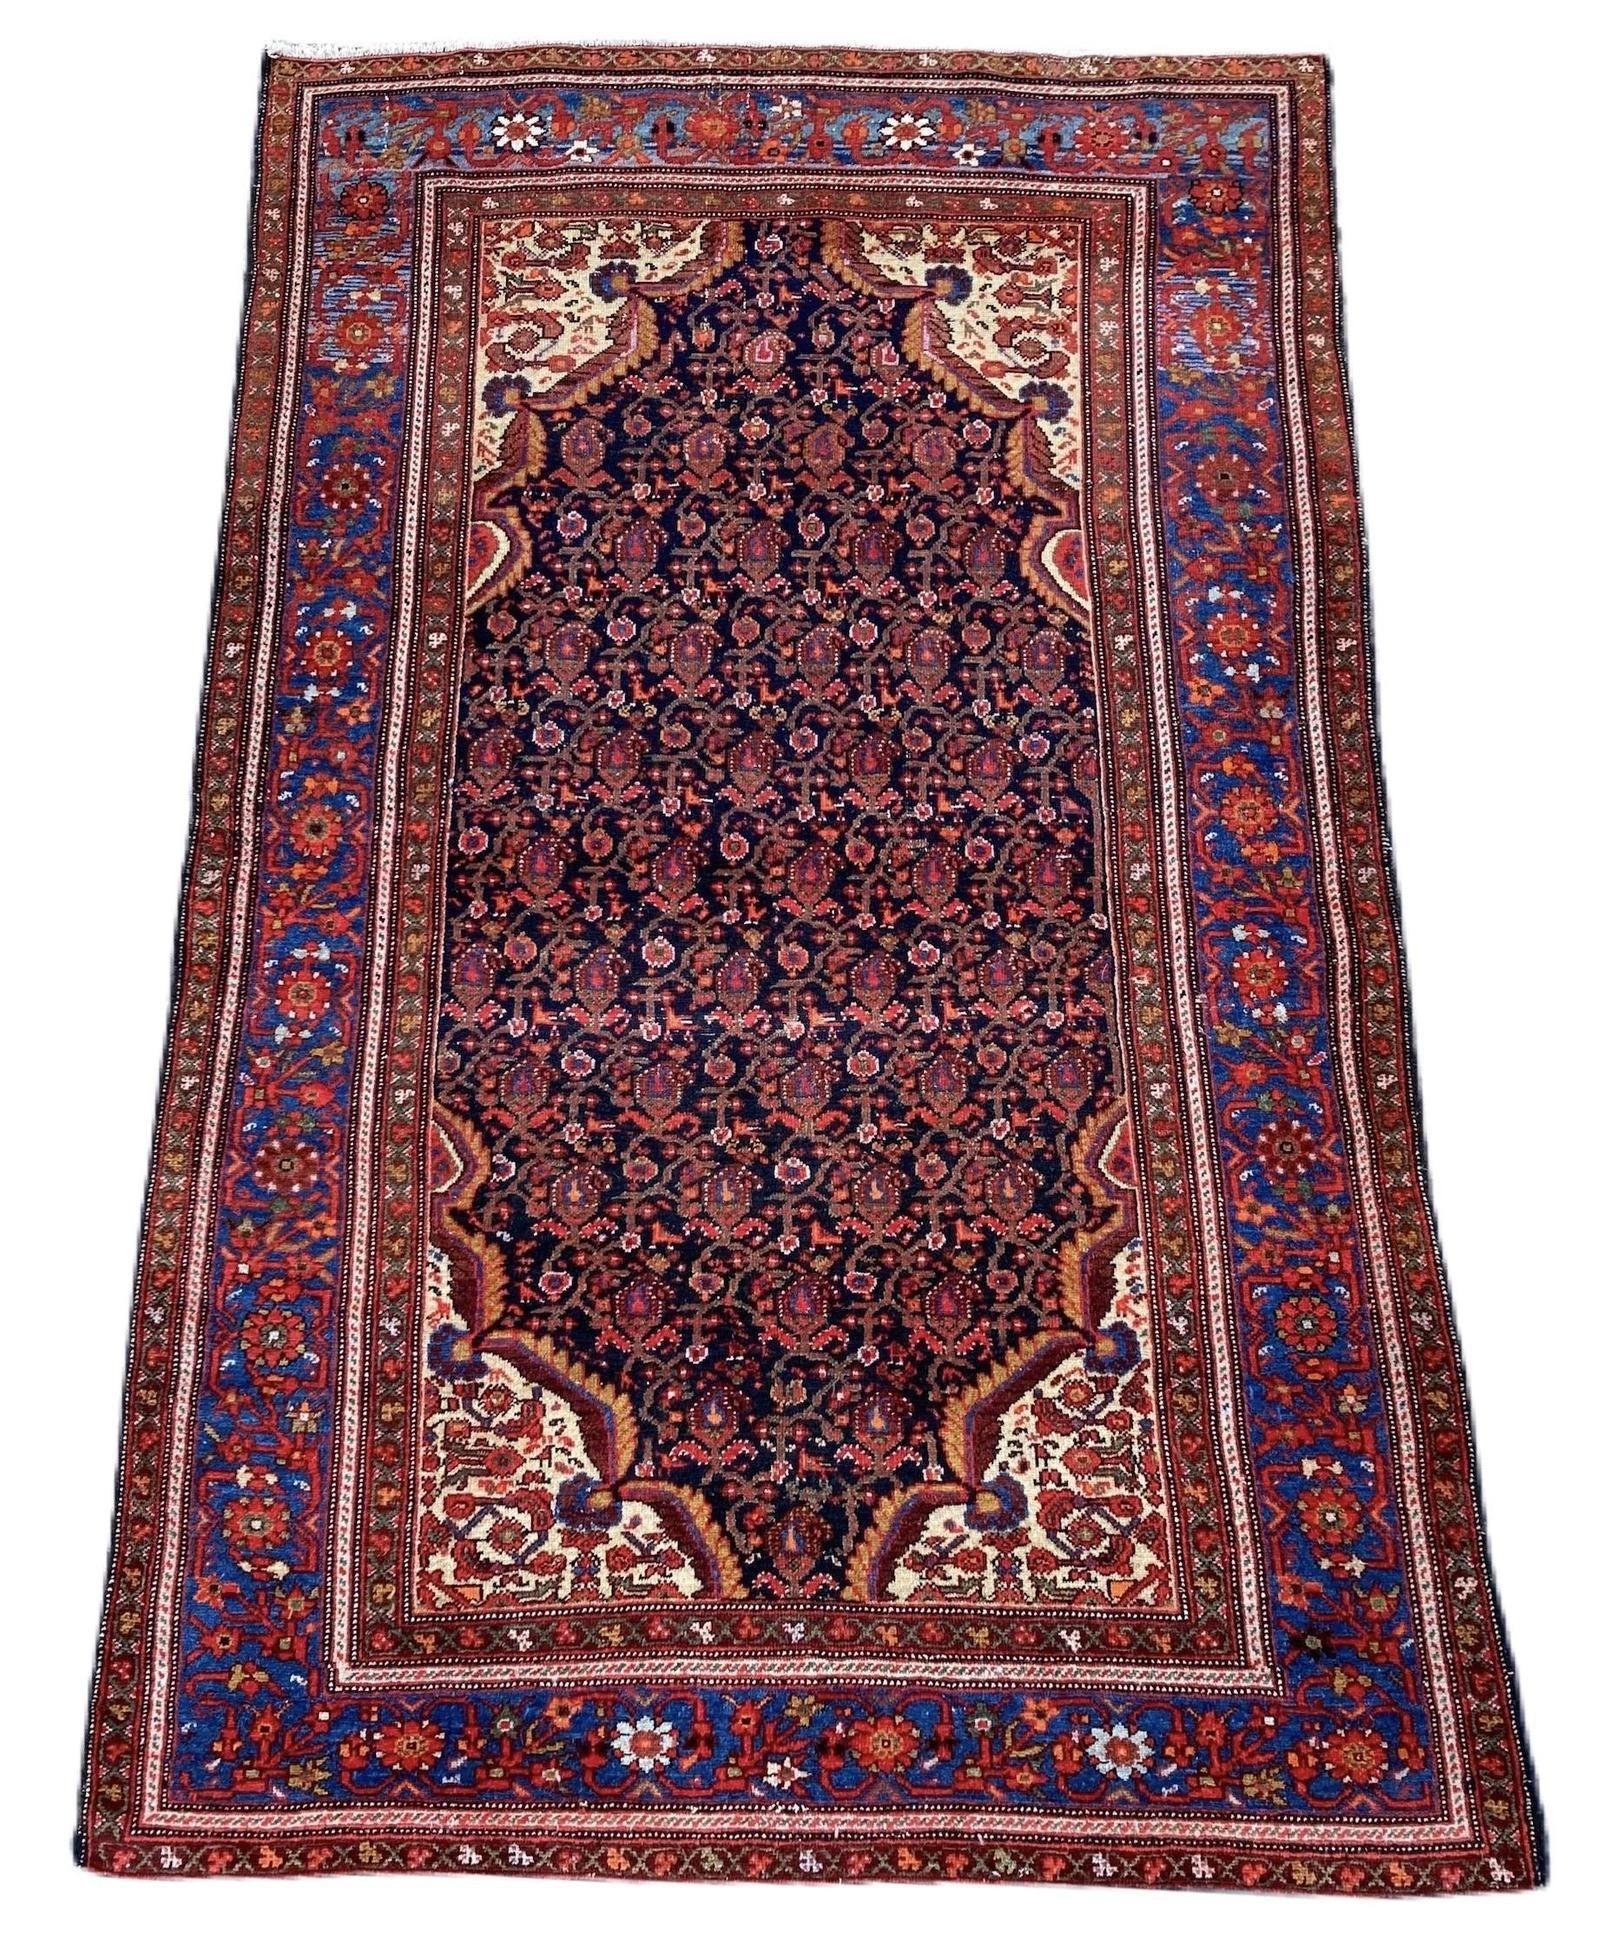 A beautiful antique Ferahan rug, handwoven circa 1900 with an allover Herati design on a midnight blue field and lighter indigo border. Finely woven with lovely wool quality and great secondary colours, especially the soft gold in the corner